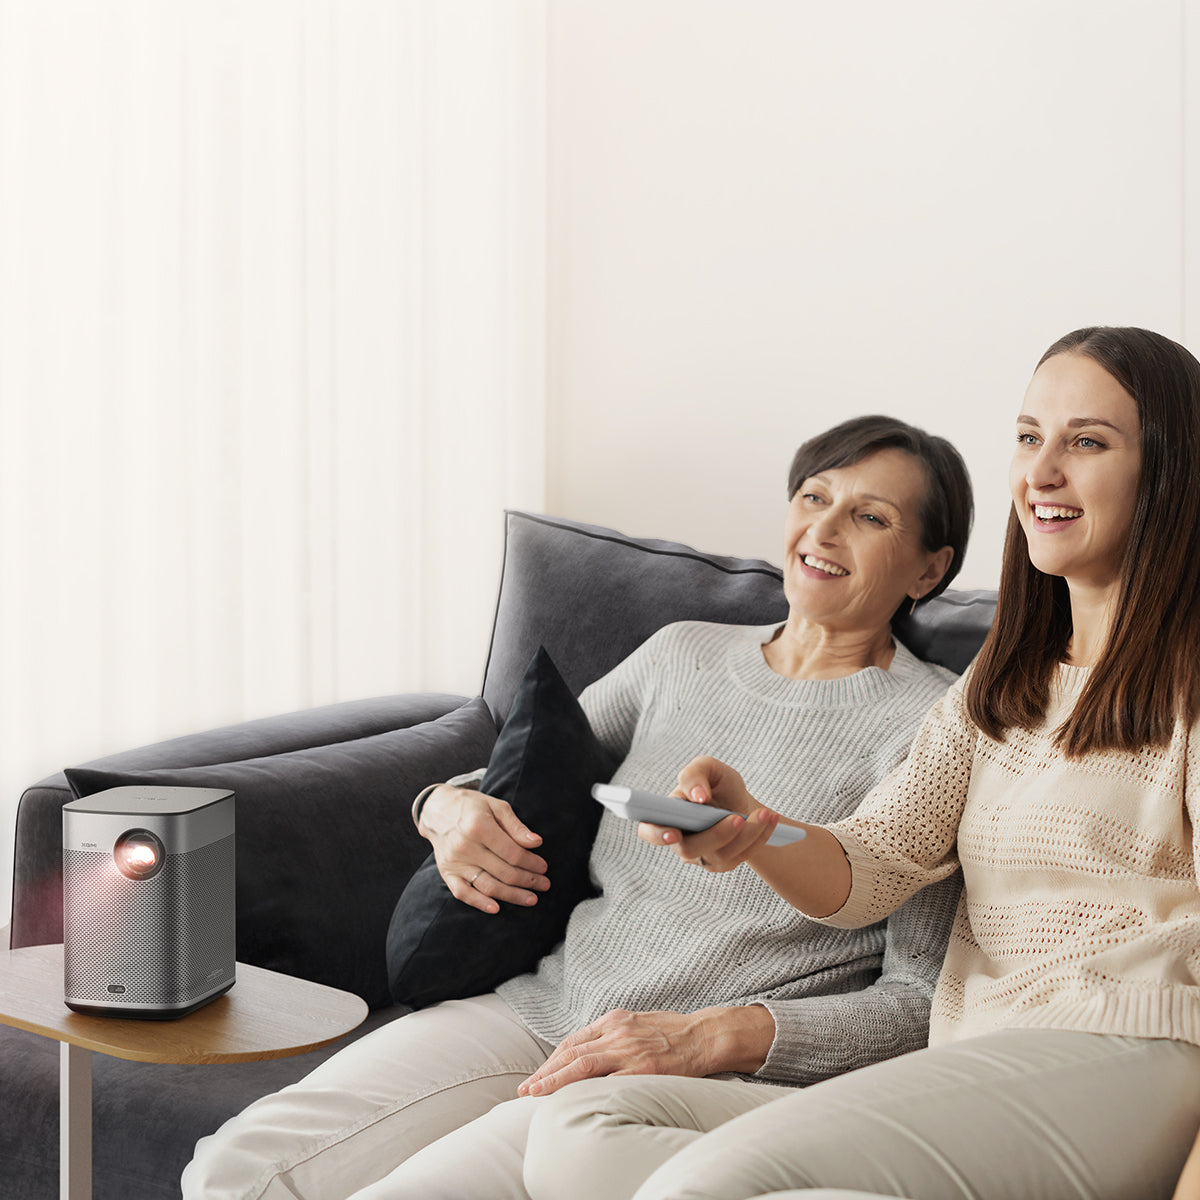 Why a Smart Projector is the Perfect Addition to Your Family Entertainment Setup